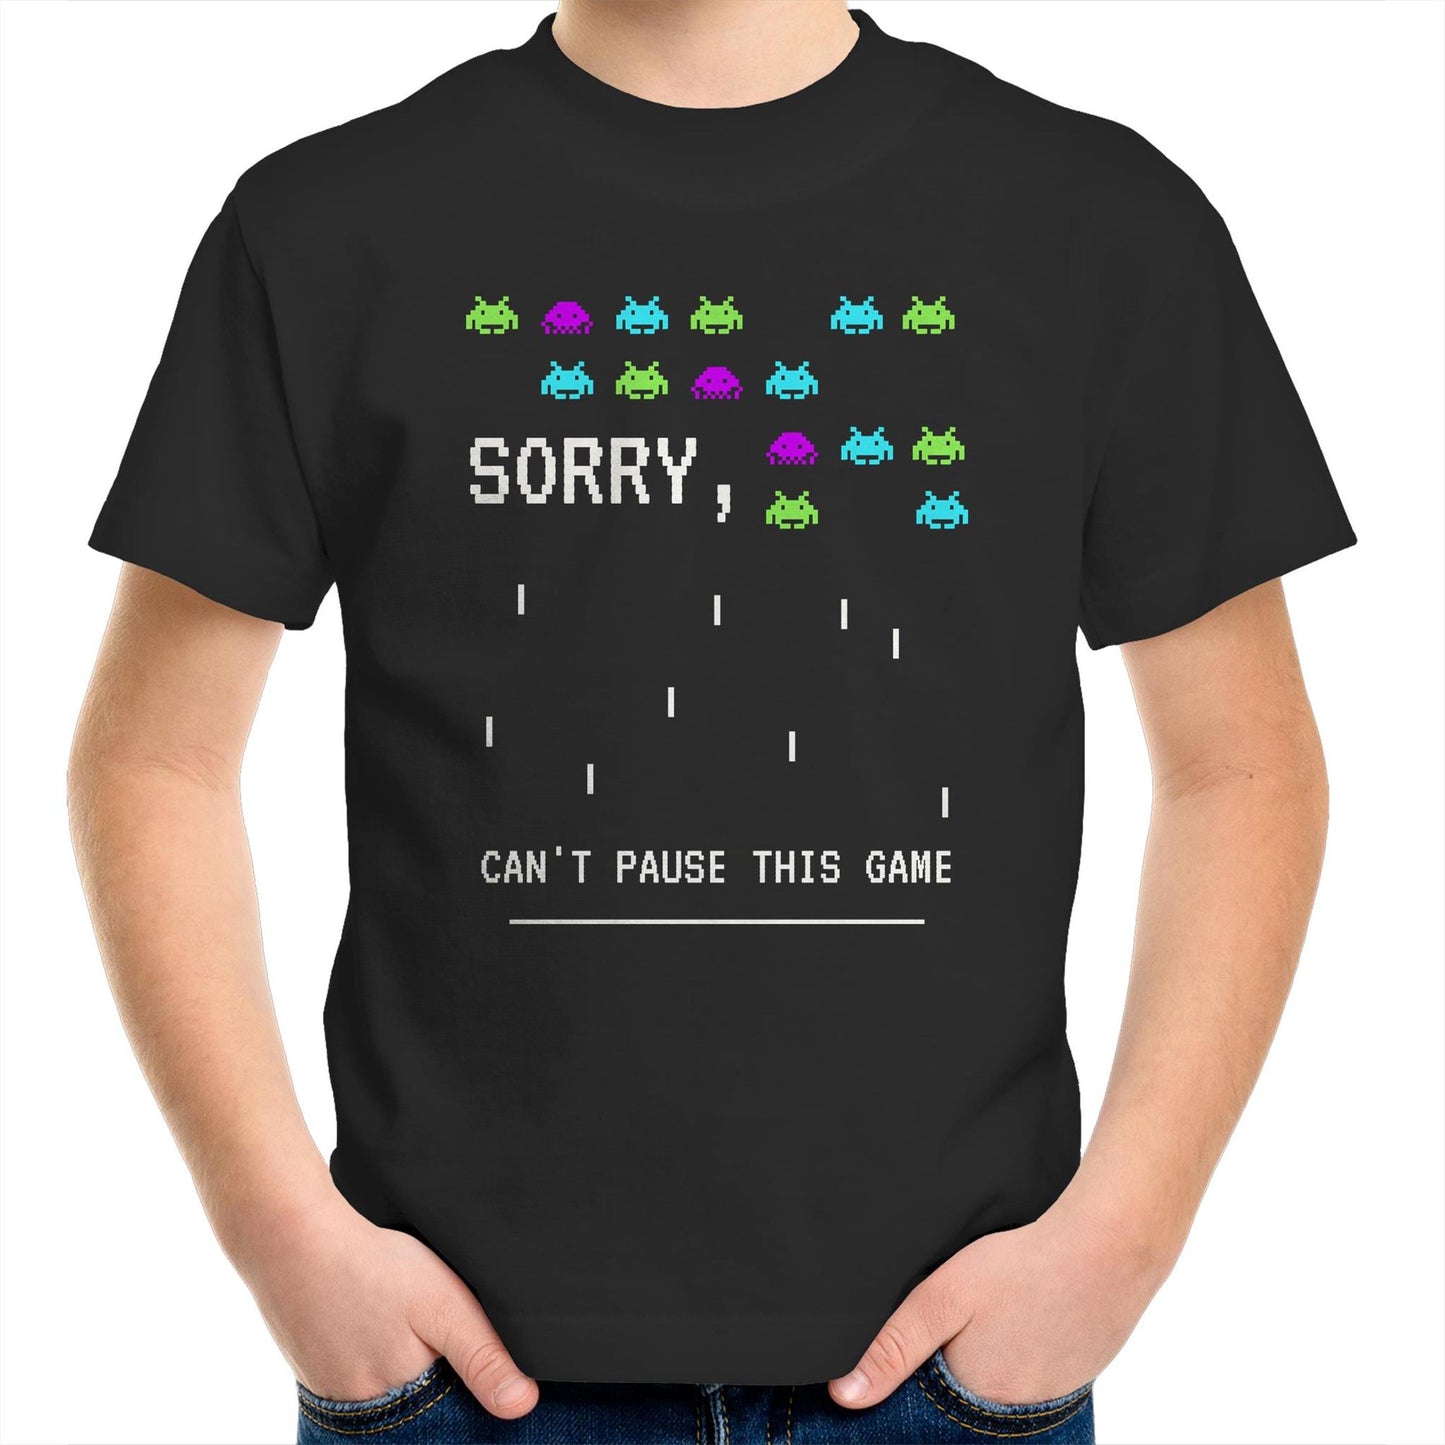 Sorry, Can't Pause This Game - Kids Youth Crew T-Shirt Black Kids Youth T-shirt Games